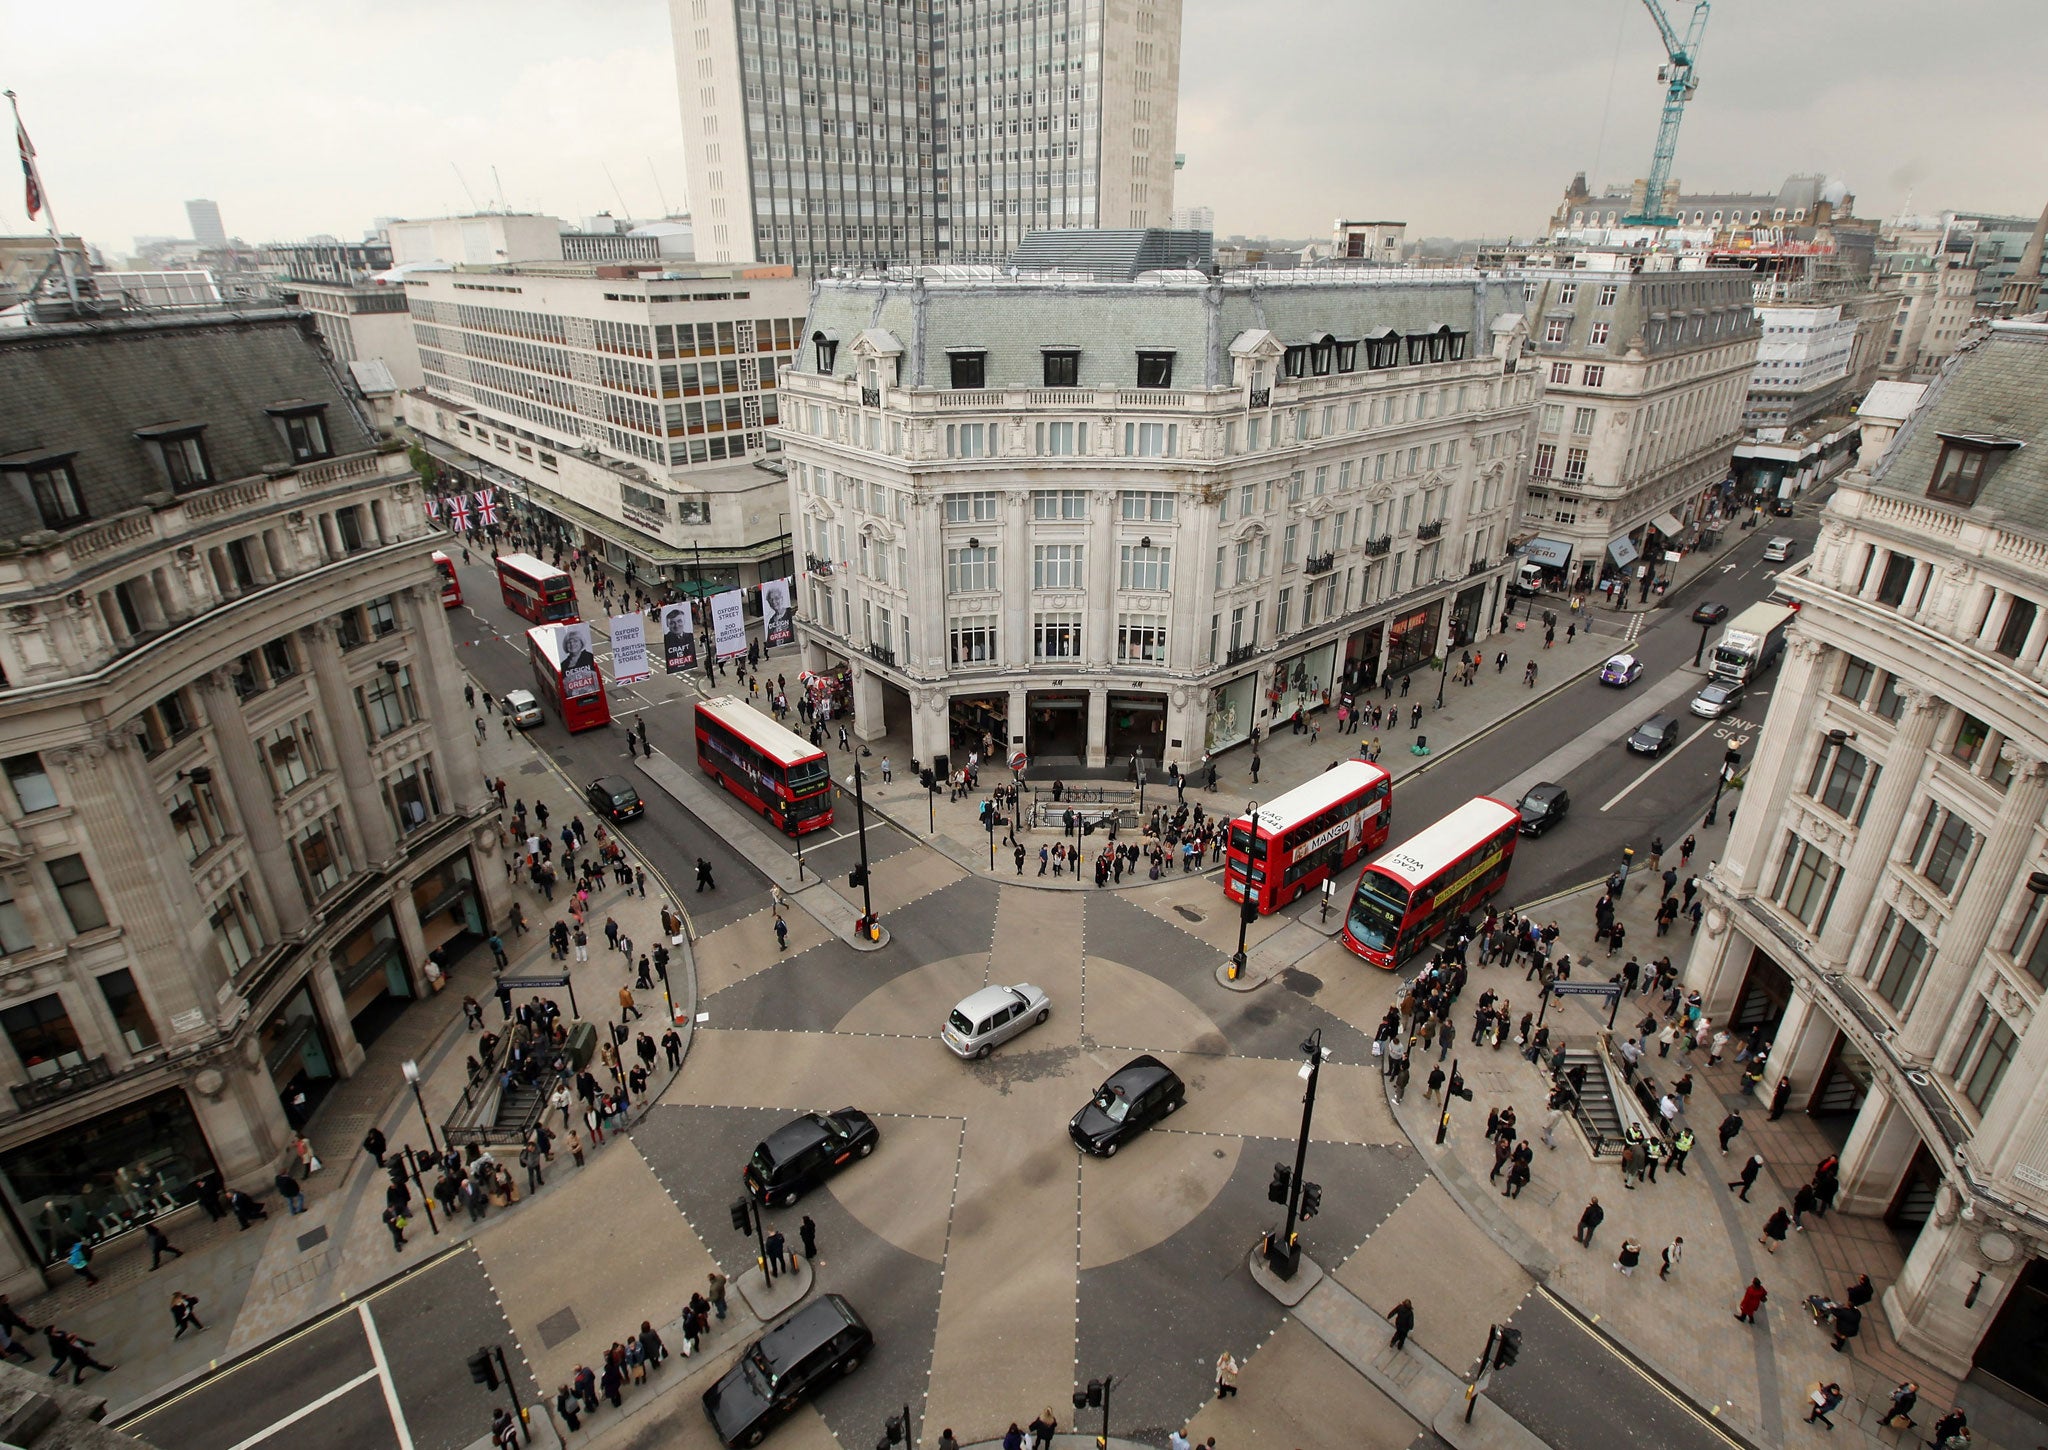 Vehicles negotiate Oxford Circus junction at the intersection of Oxford Street and Regent Street